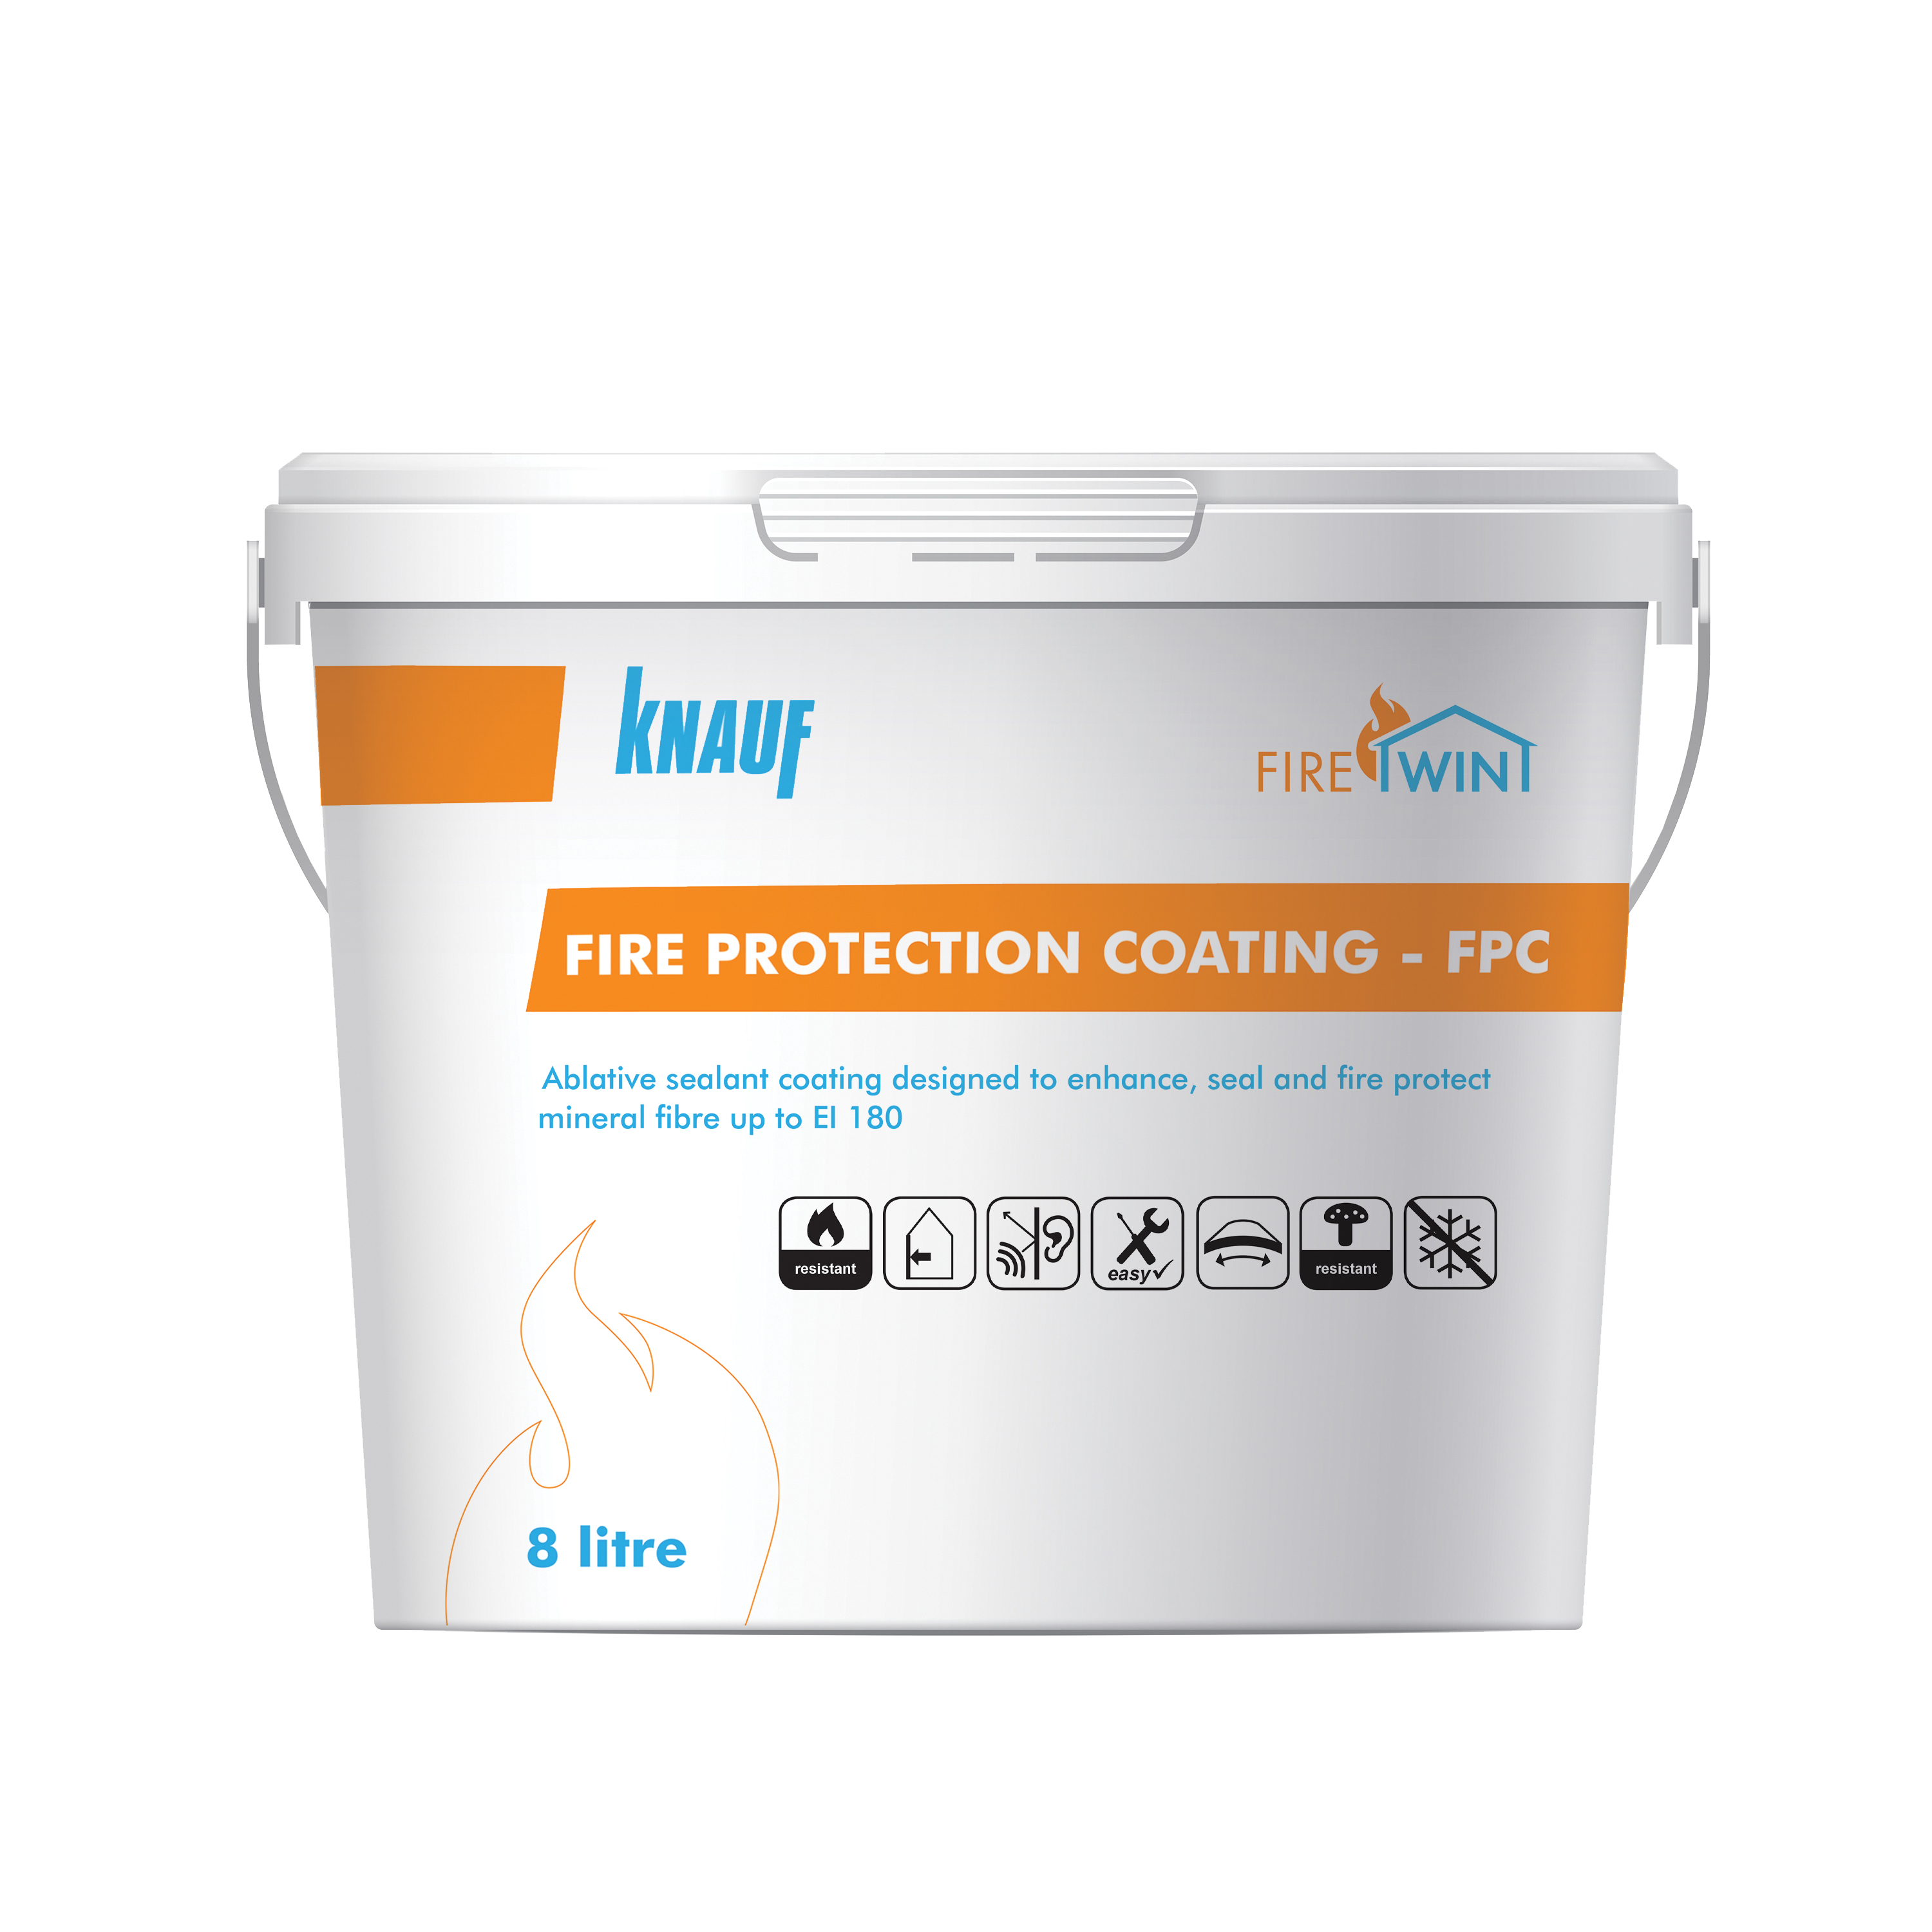 Knauf - Fire Protection Coating (FPC) - 24517 0082 Fire Protection Coating FPC